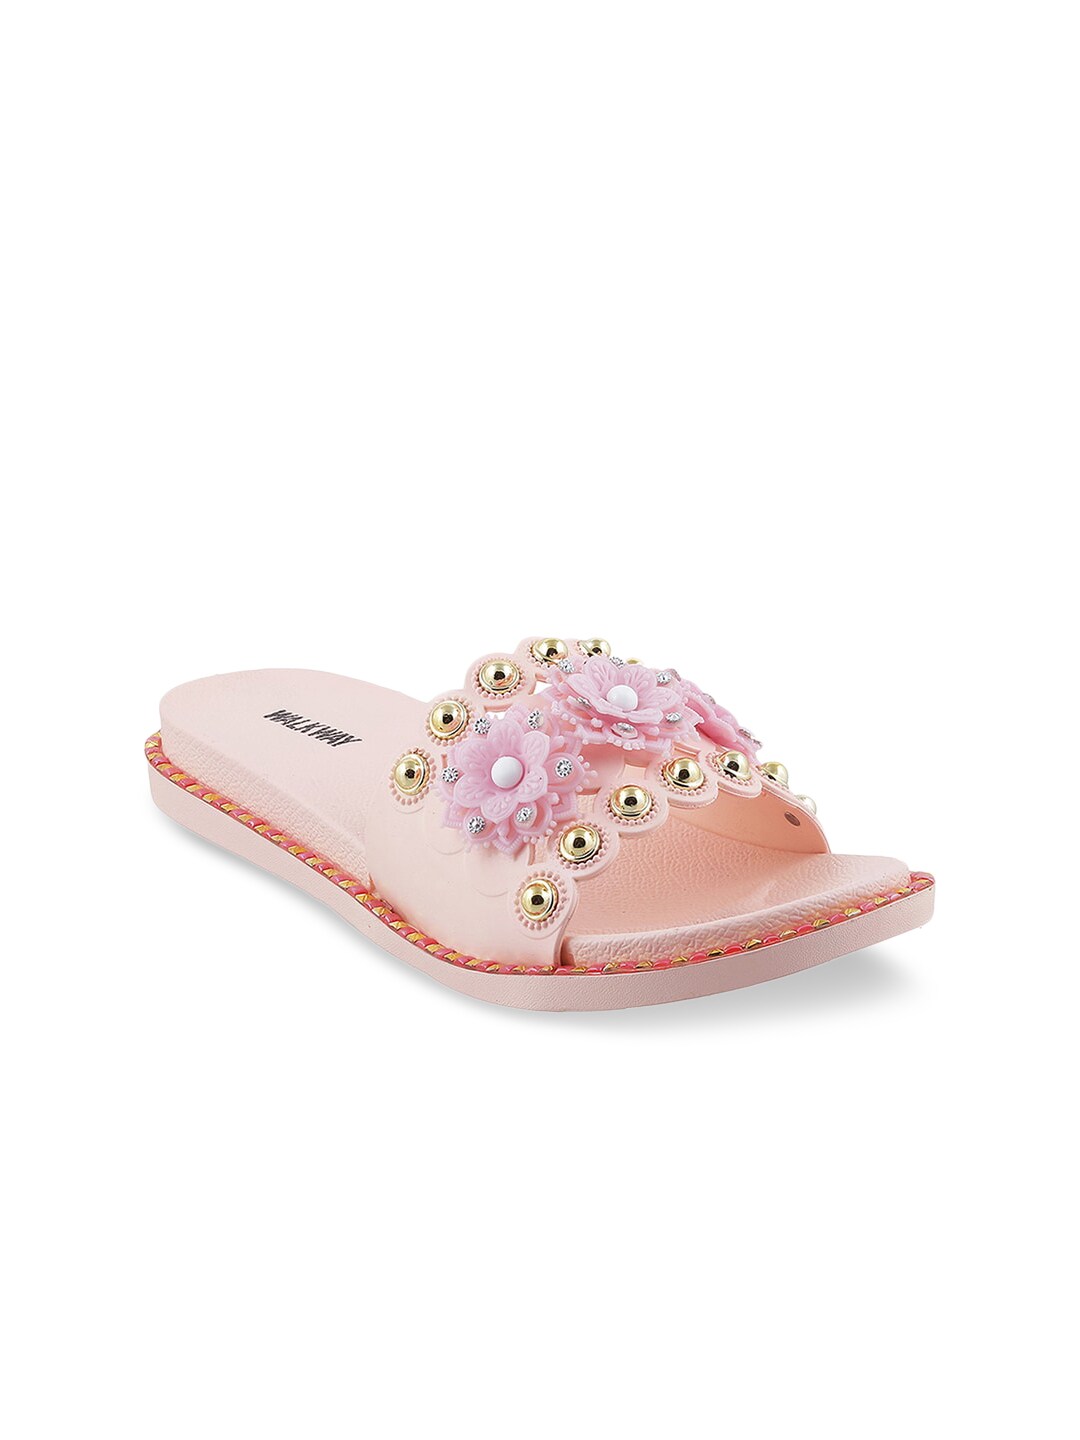 WALKWAY by Metro Women Pink Embellished Open Toe Flats Price in India